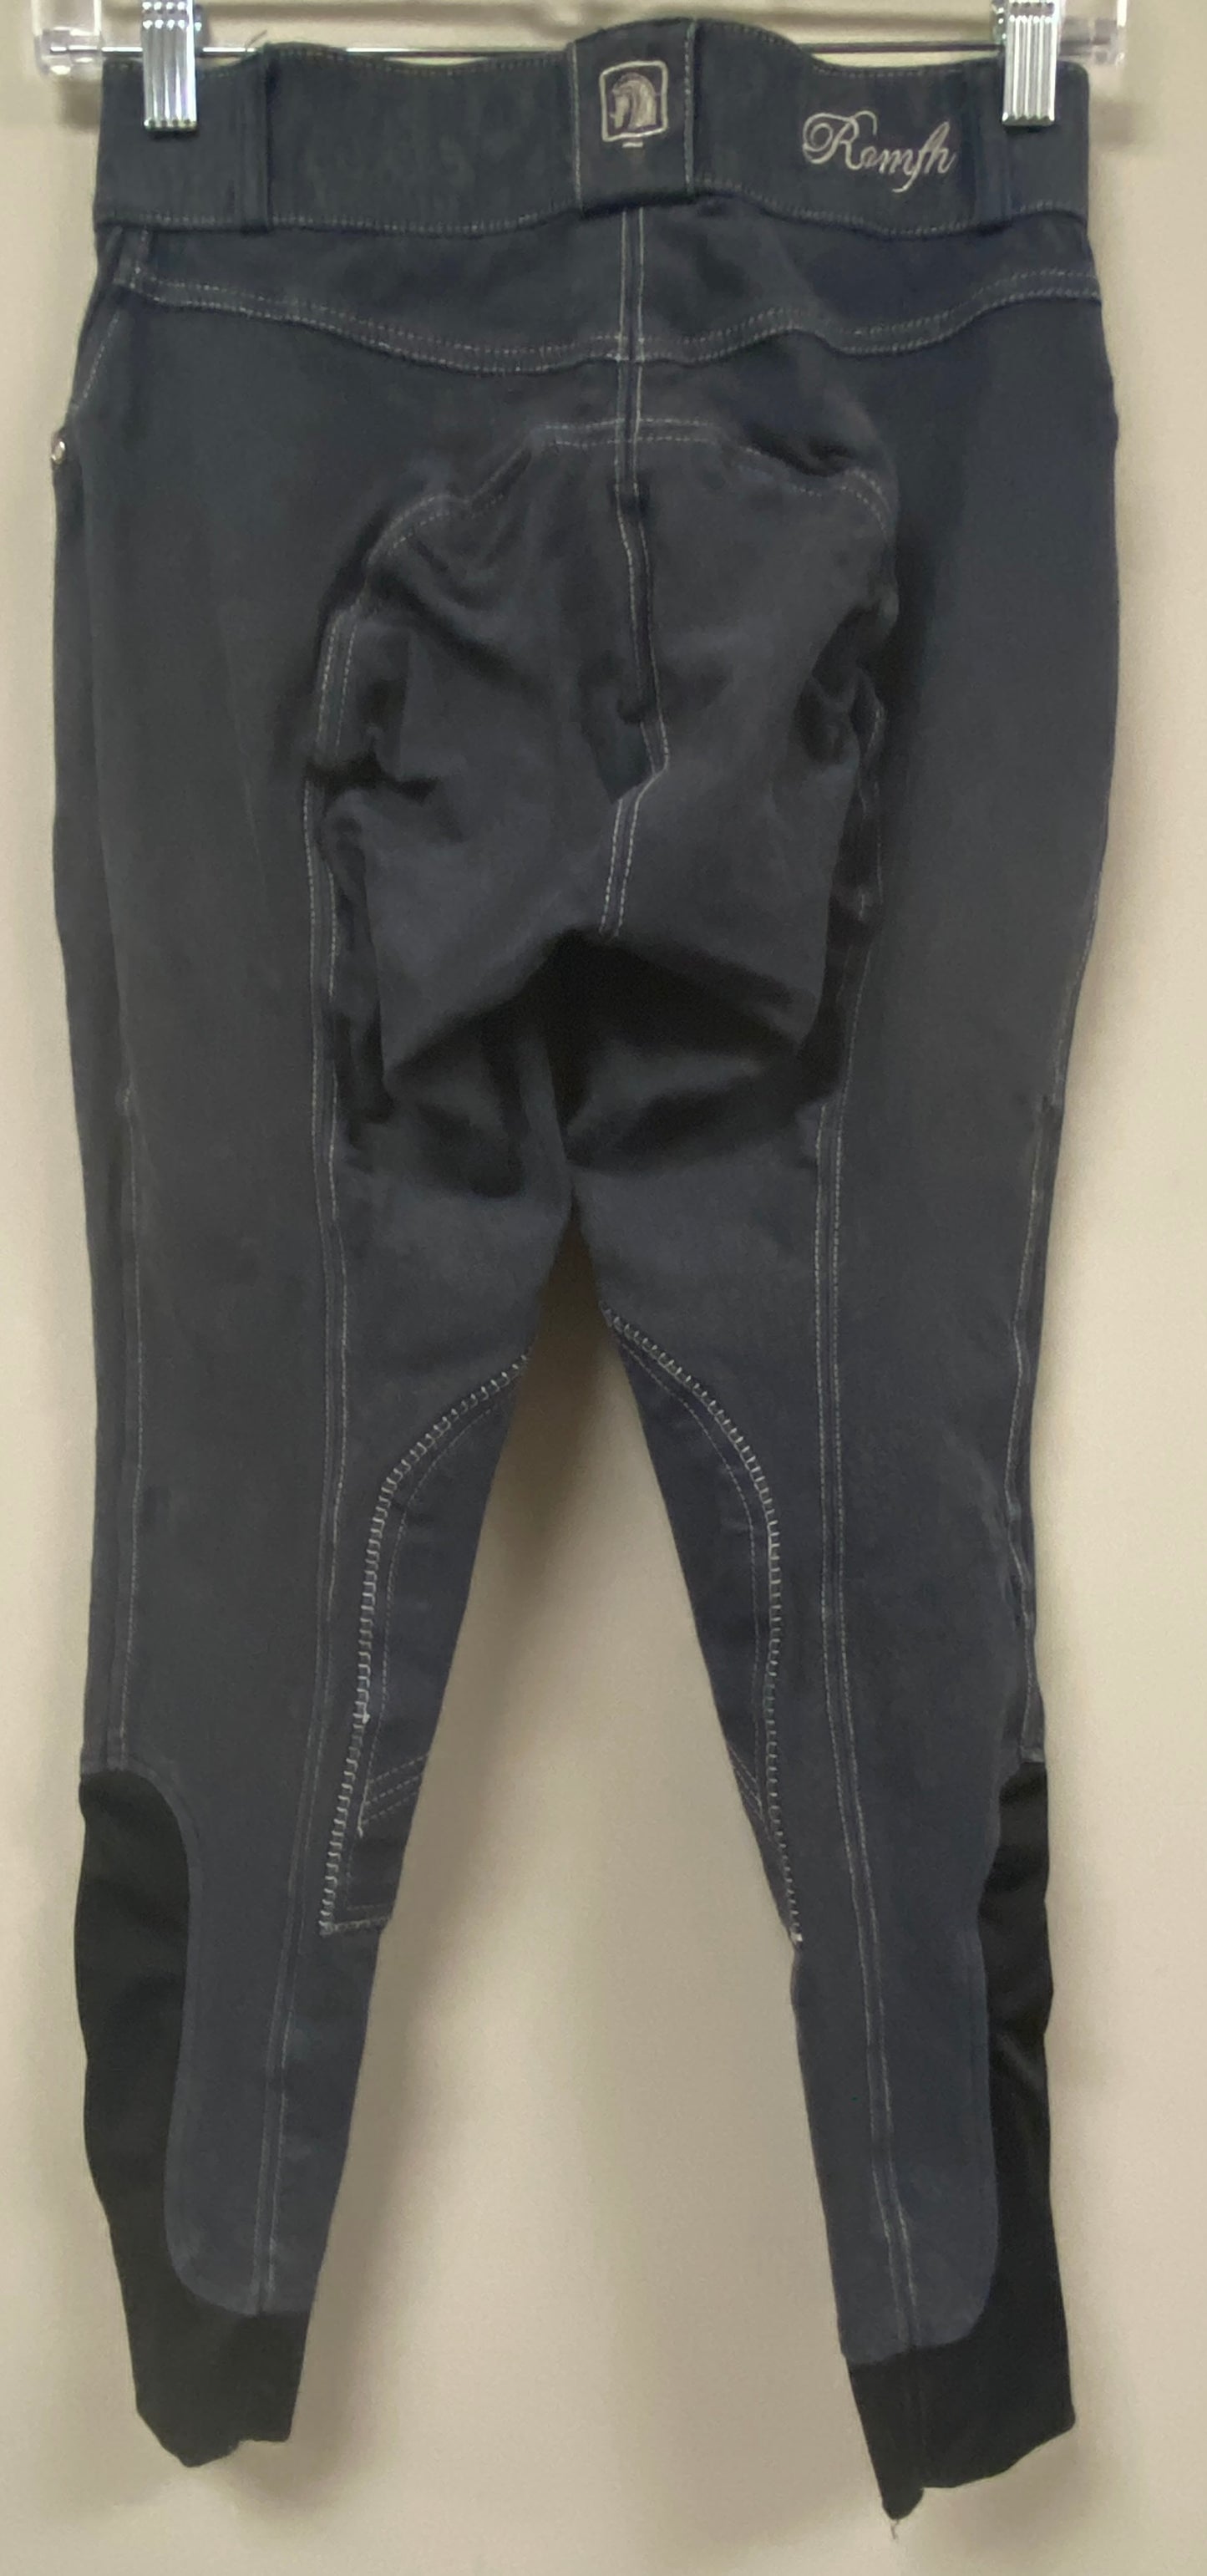 26R Gray Patterned ROMFH Knee Patch Breeches